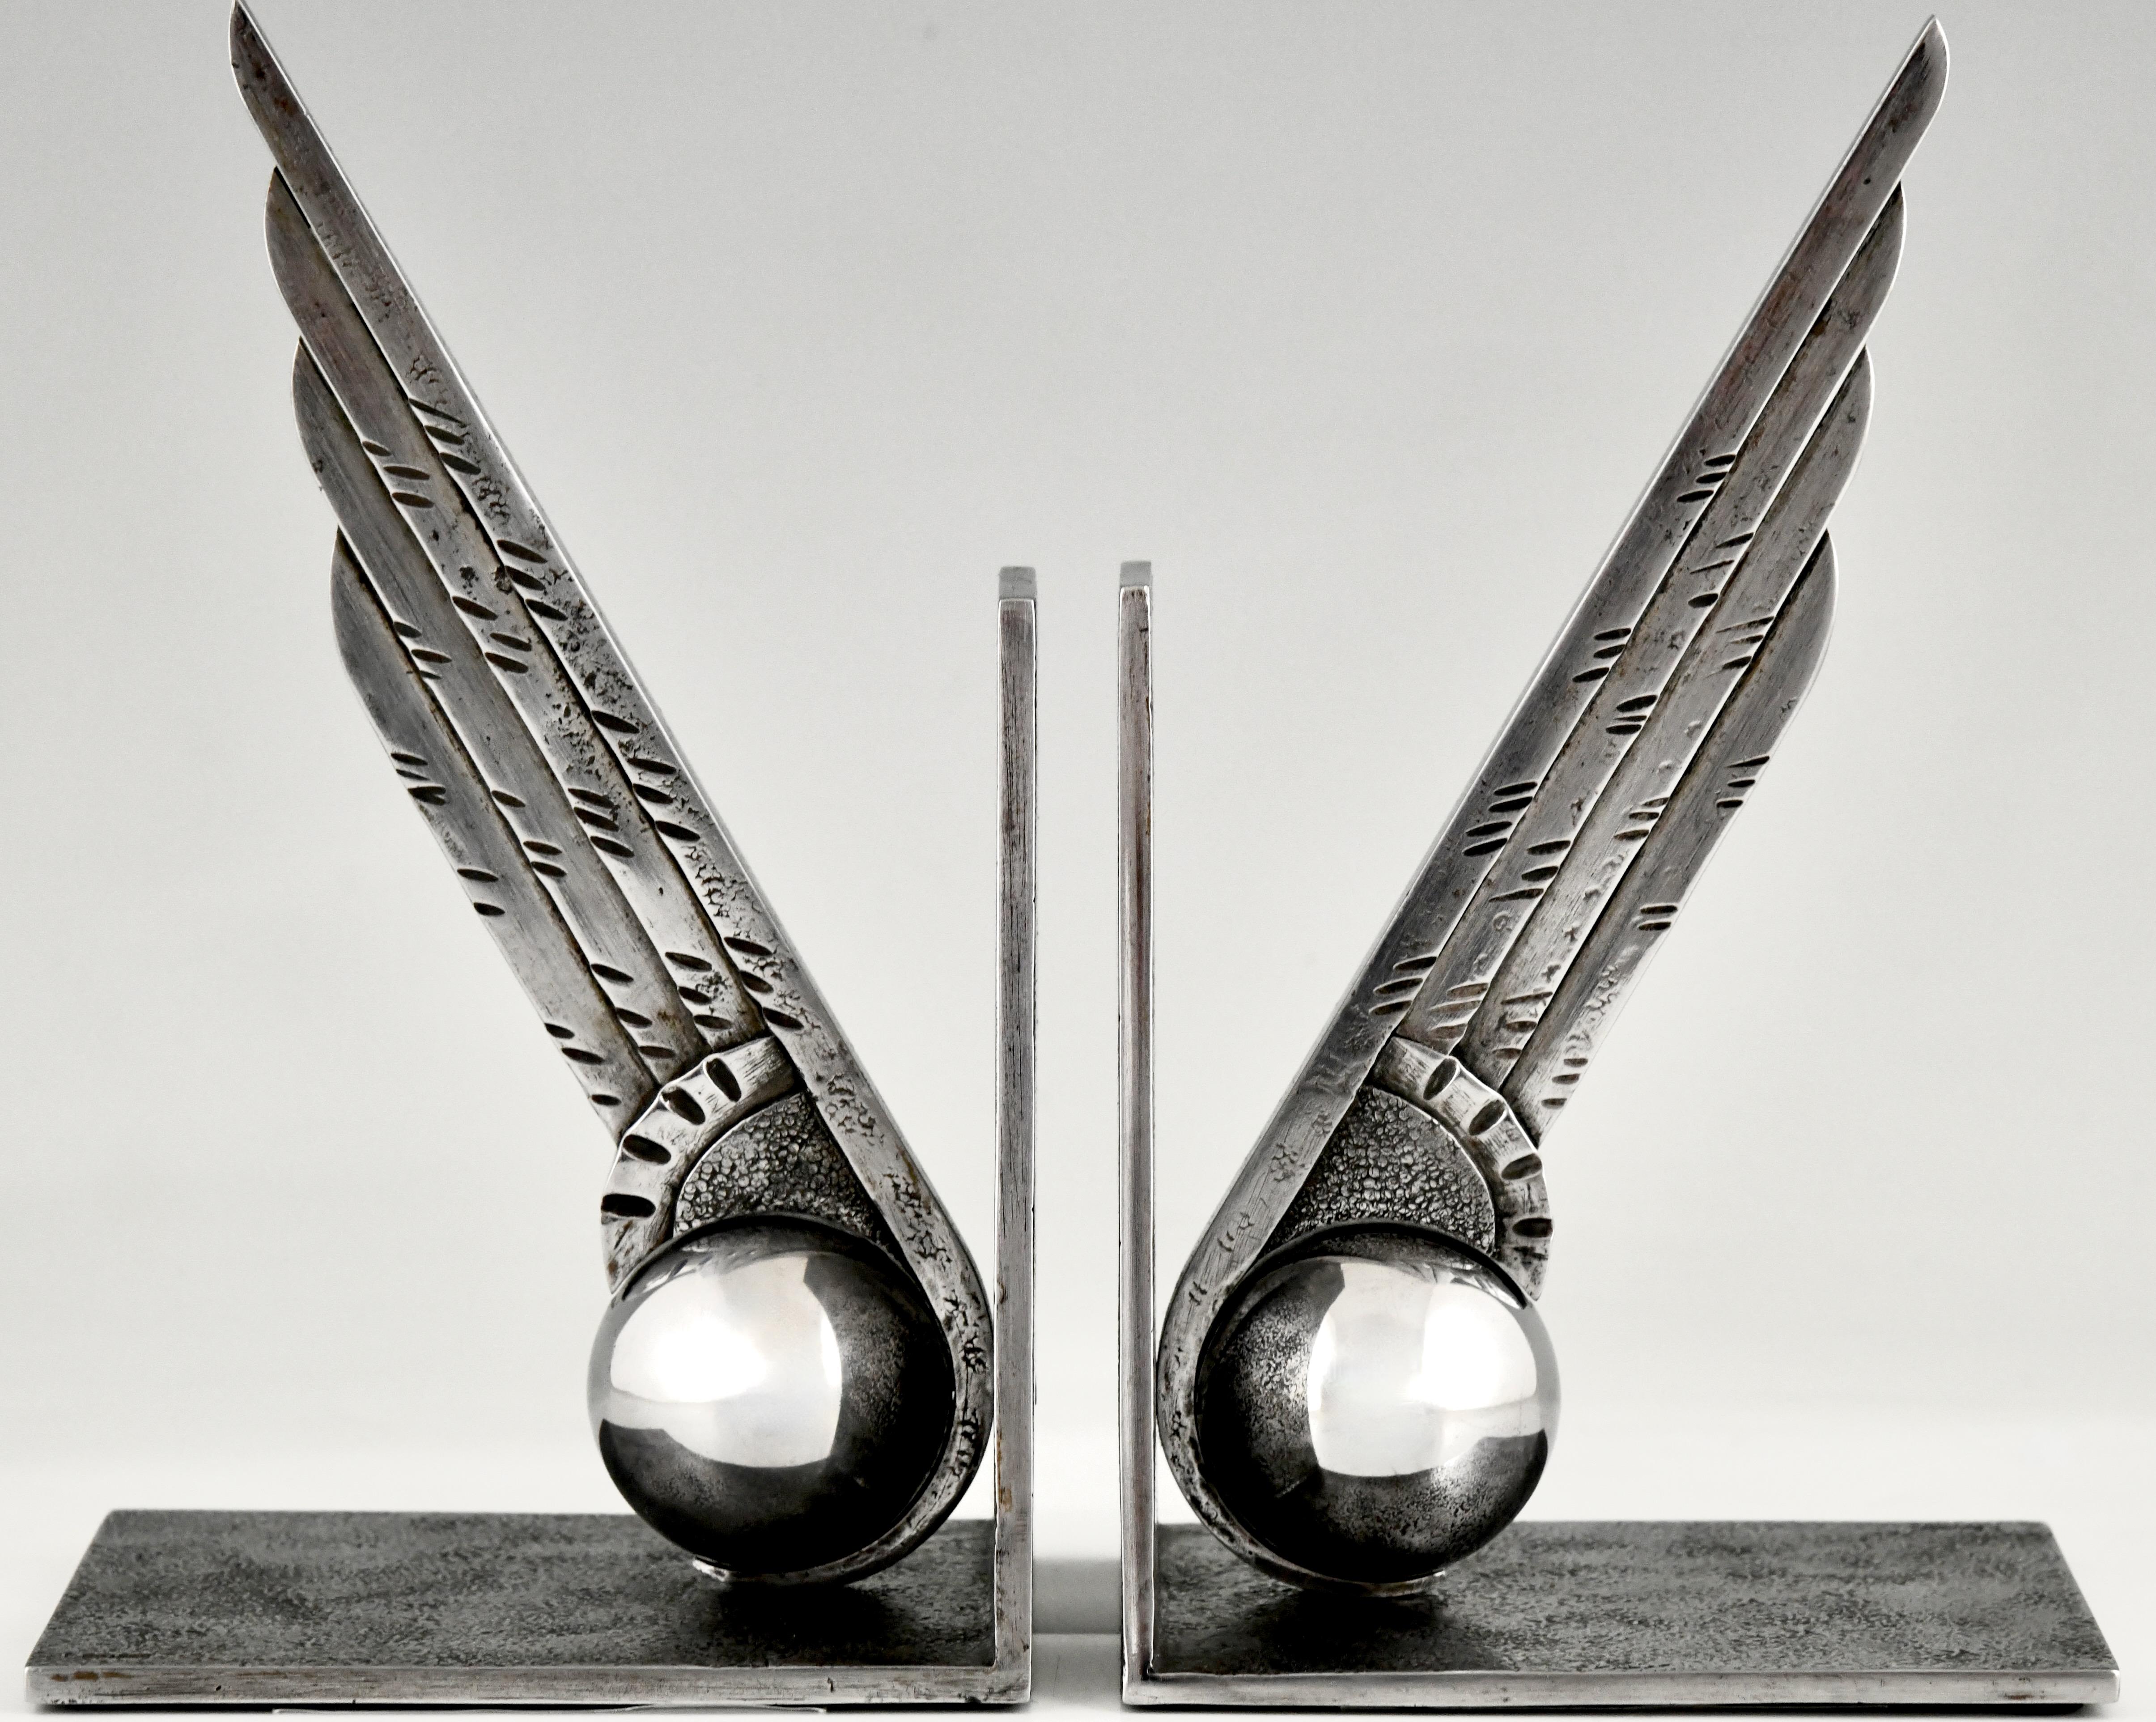 Art Deco wrought iron wing bookends by Edgar Brandt.
France 1930
These bookends are illustrated in:
Art Deco sculpture, Alastair Duncan.
Literature:
Edgar Brandt master of Art Deco ironwork, Joan Kahr. 
A pair of Art Deco wrought iron bookends are